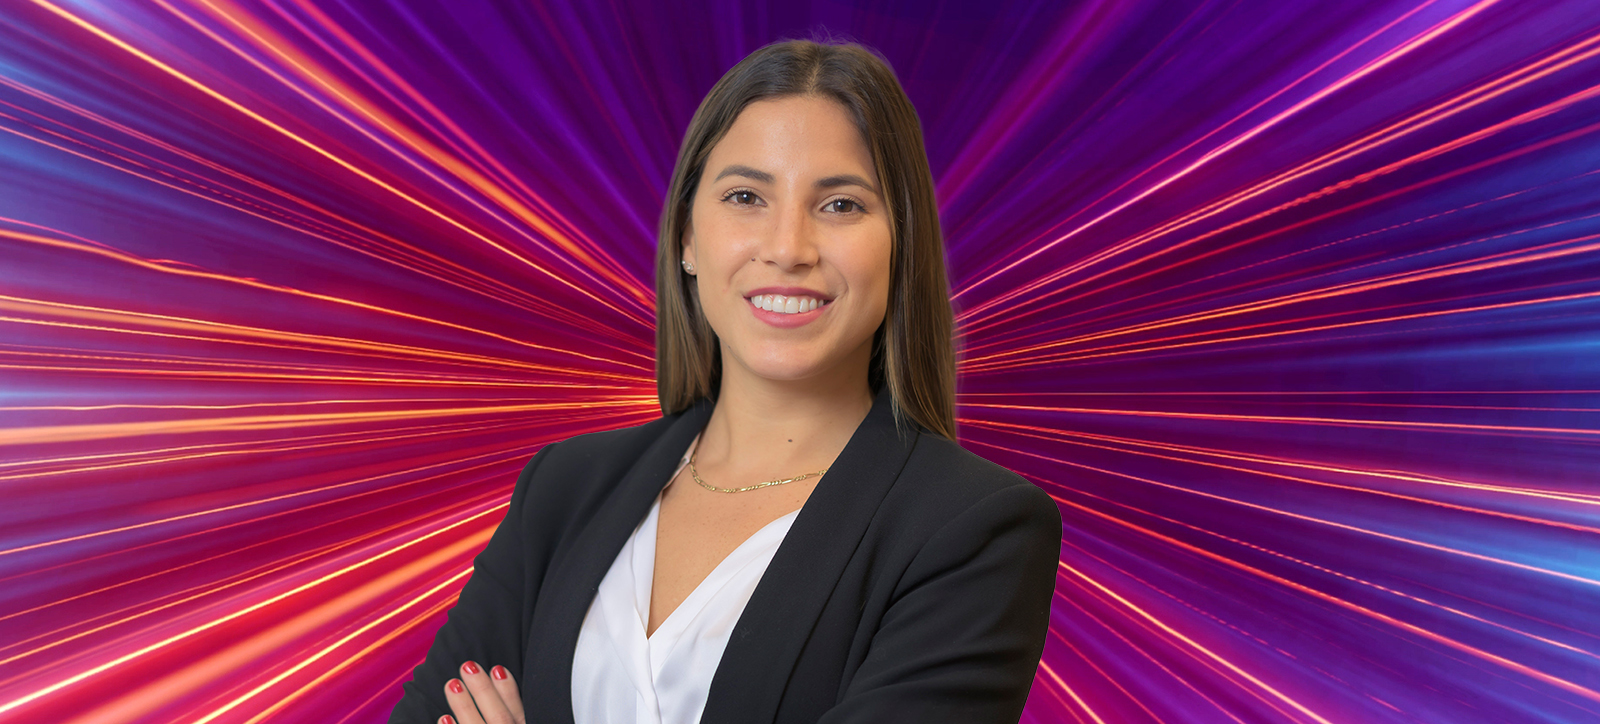 A young, female professional poses with her arms crossed against a red and purple background that converges towards a vanishing point, visually suggesting accelerated movement.